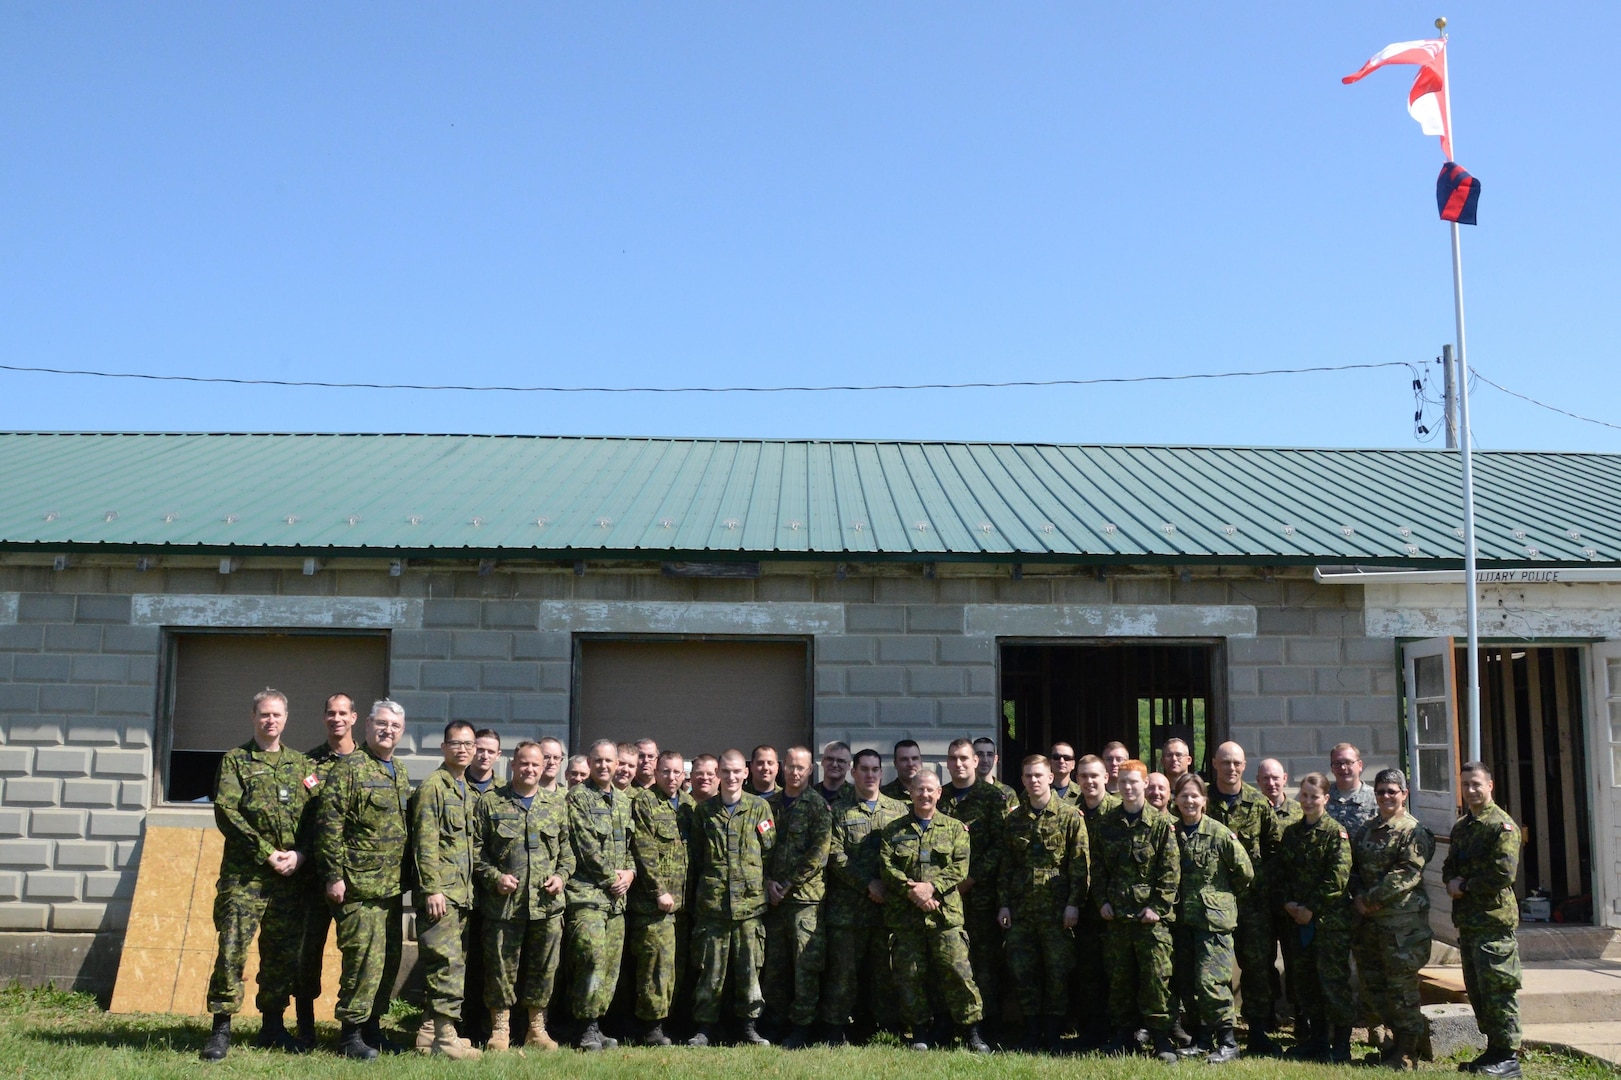 Canadian and American forces gather for a group shot in front of the building the Canadian troops helped to renovate. The troops were here for several weeks as part of a partnership program that offers U.S. and Canada engineers to train together.